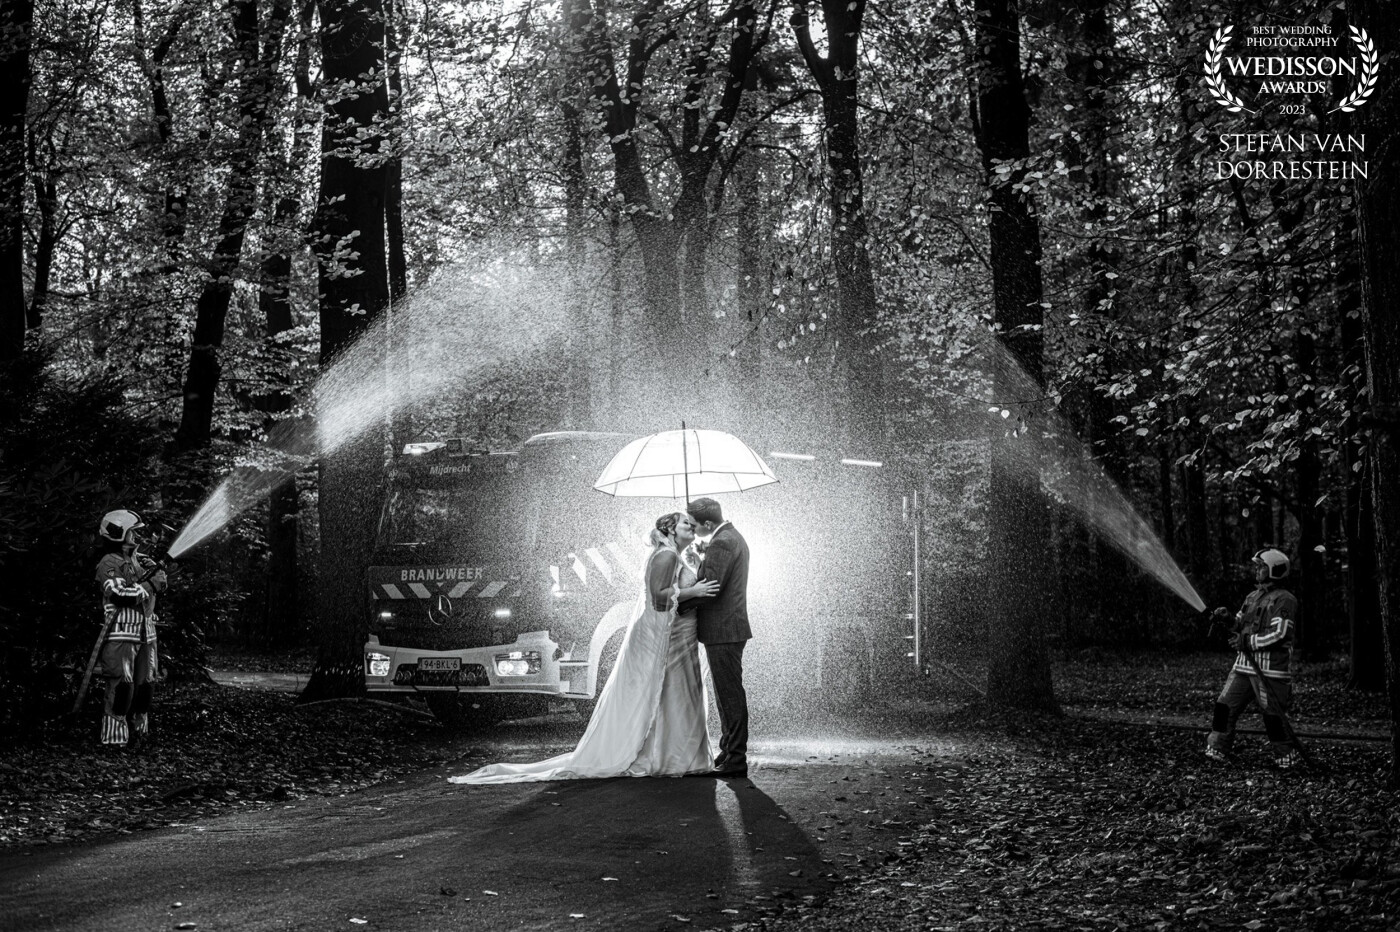 The groom is a firefighter and his colleagues asked if I wanted to take a nice photo with the fire truck. Before the wedding, the bride asked me if I could take a nice rain photo. I then said.. well it must be raining.. Fortunately, the colleagues had enough water with them to make this picture till a success.